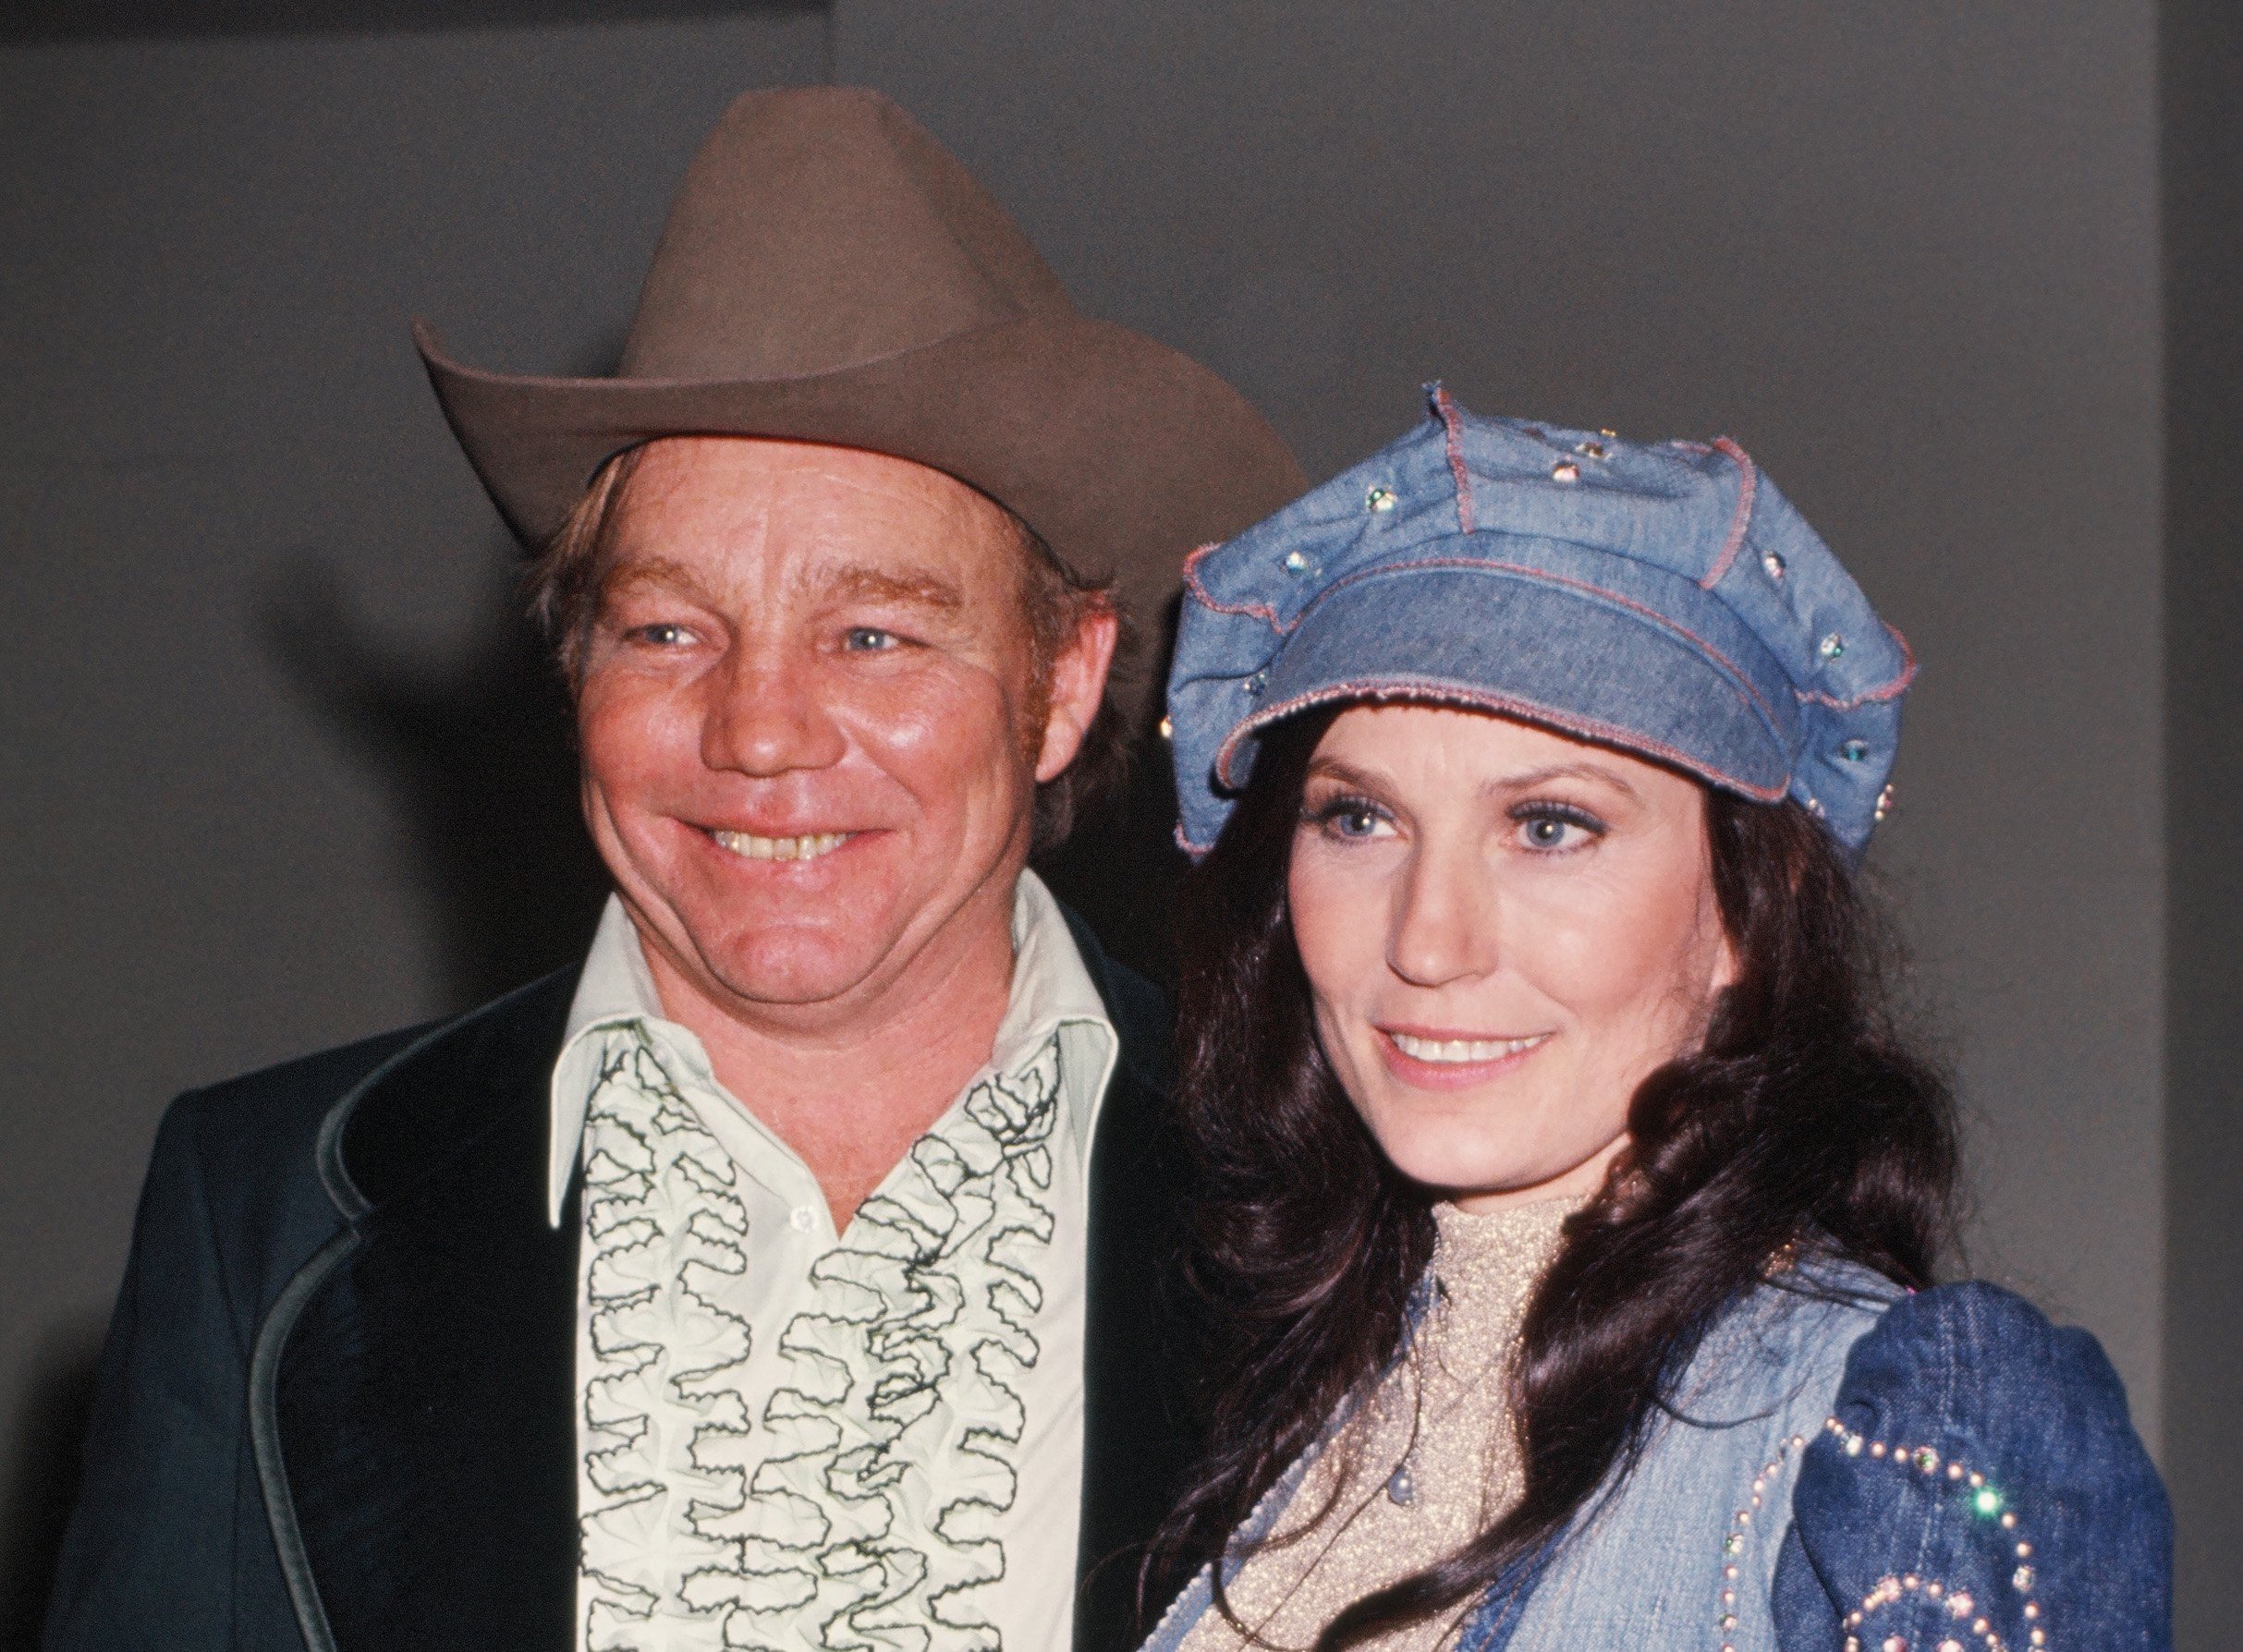 Oliver and Loretta Lynn circa 1976. Lynn portrayed her husband as a cheater in some of her songs.